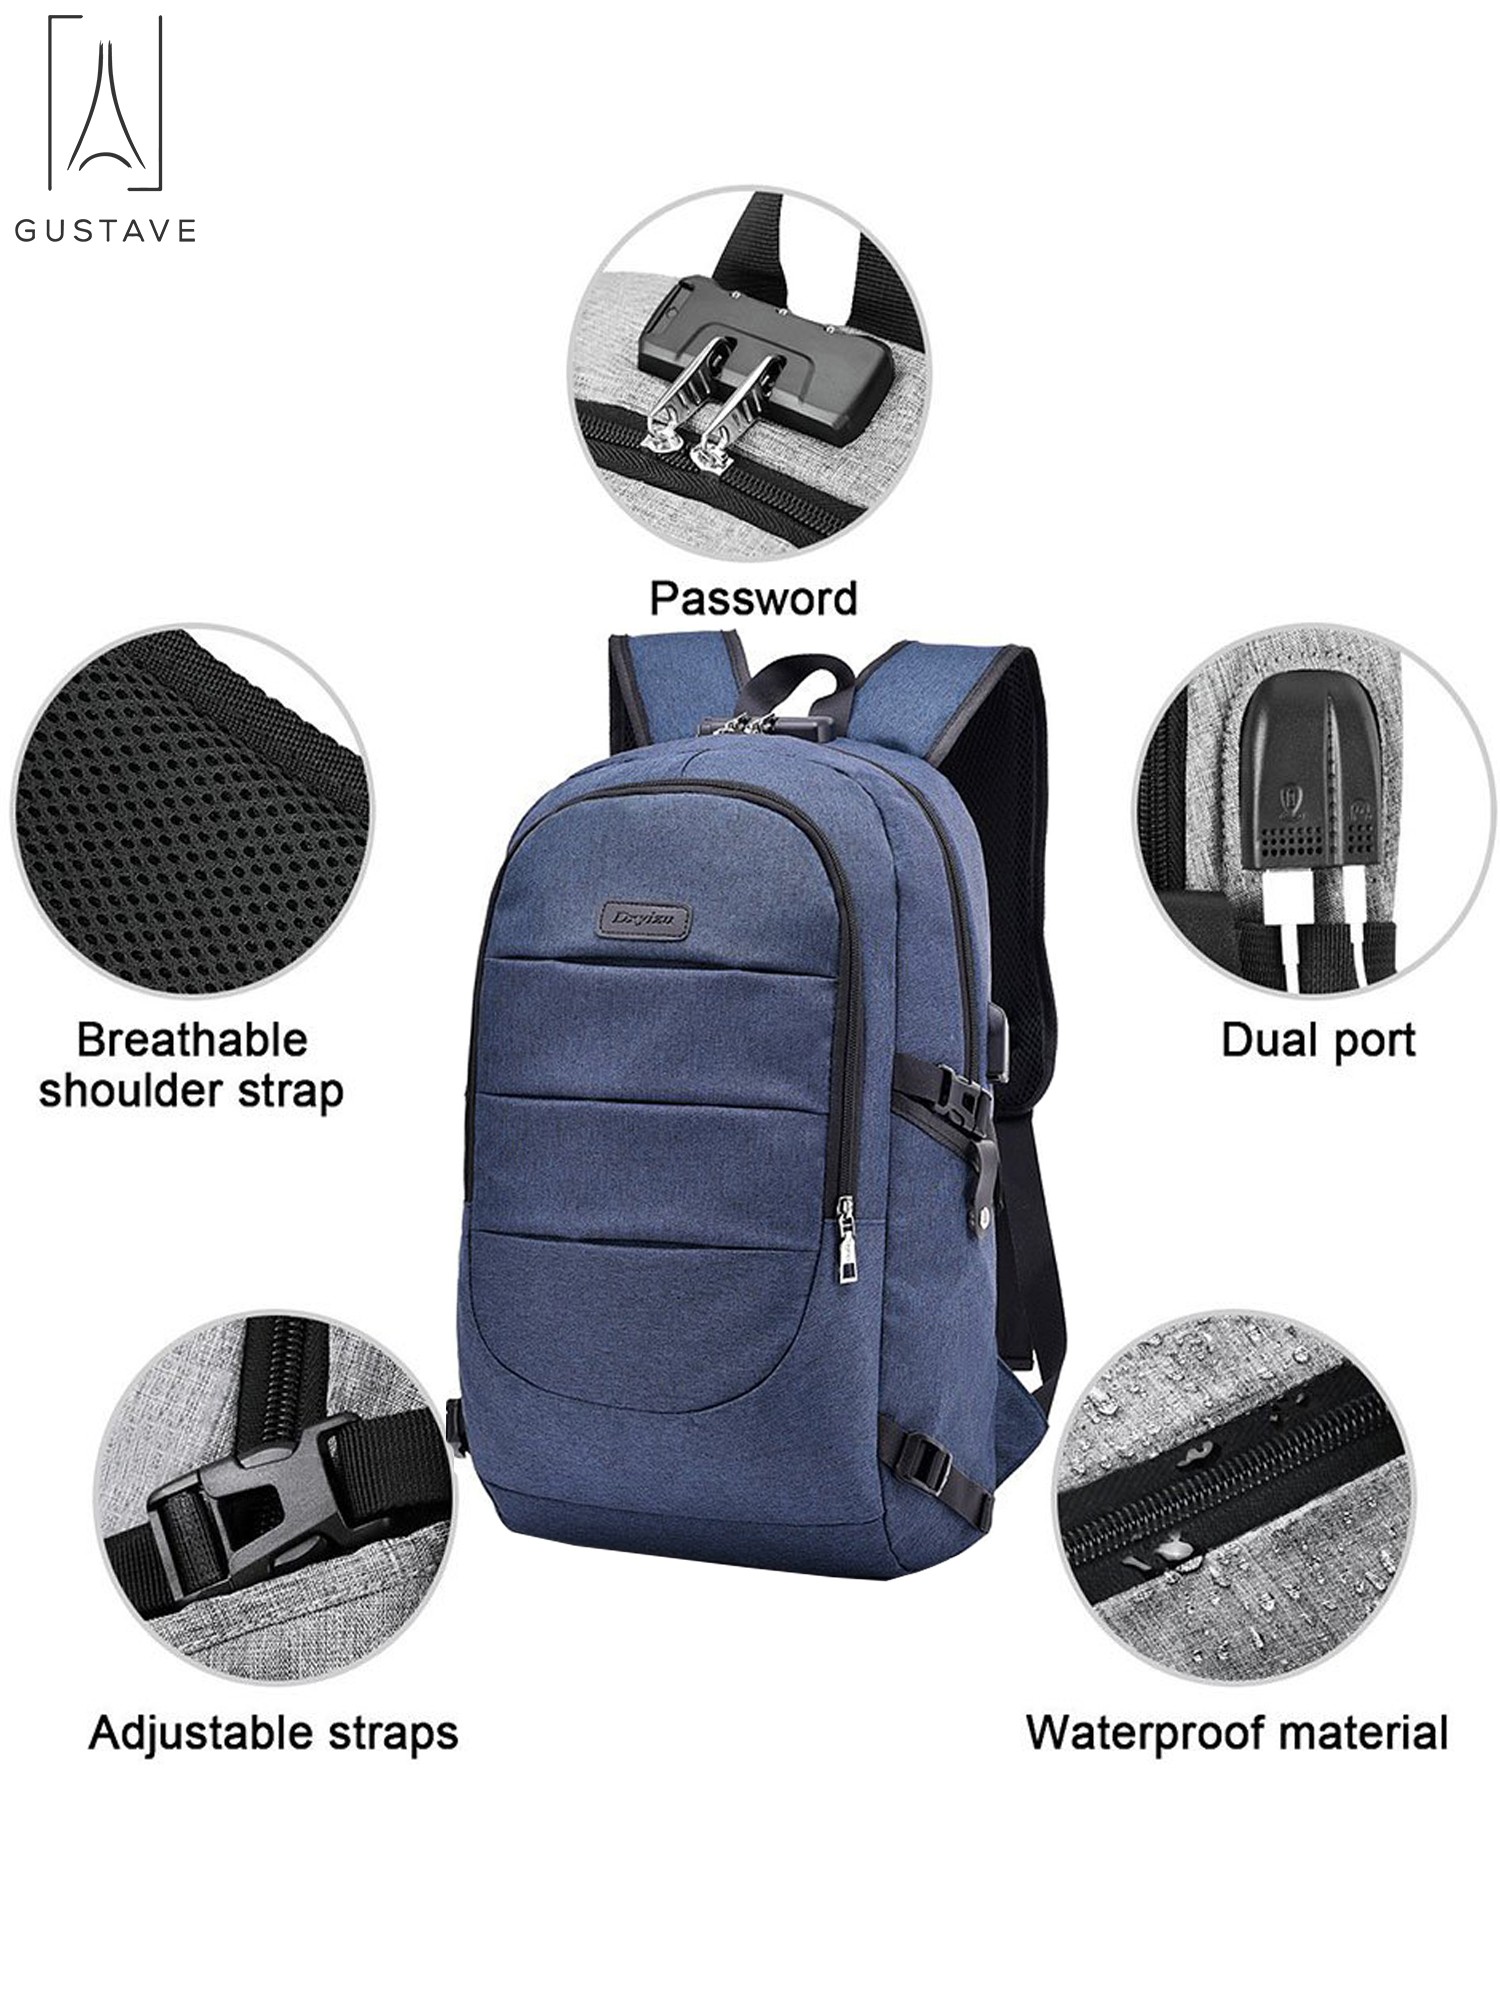 Gustave Laptop Backpack Water Resistant Anti-Theft College Backpack with USB Charging Port and Lock 17Inch Compurter Backpacks for Women Men, Casual Hiking Travel Daypack "Blue" - image 4 of 9